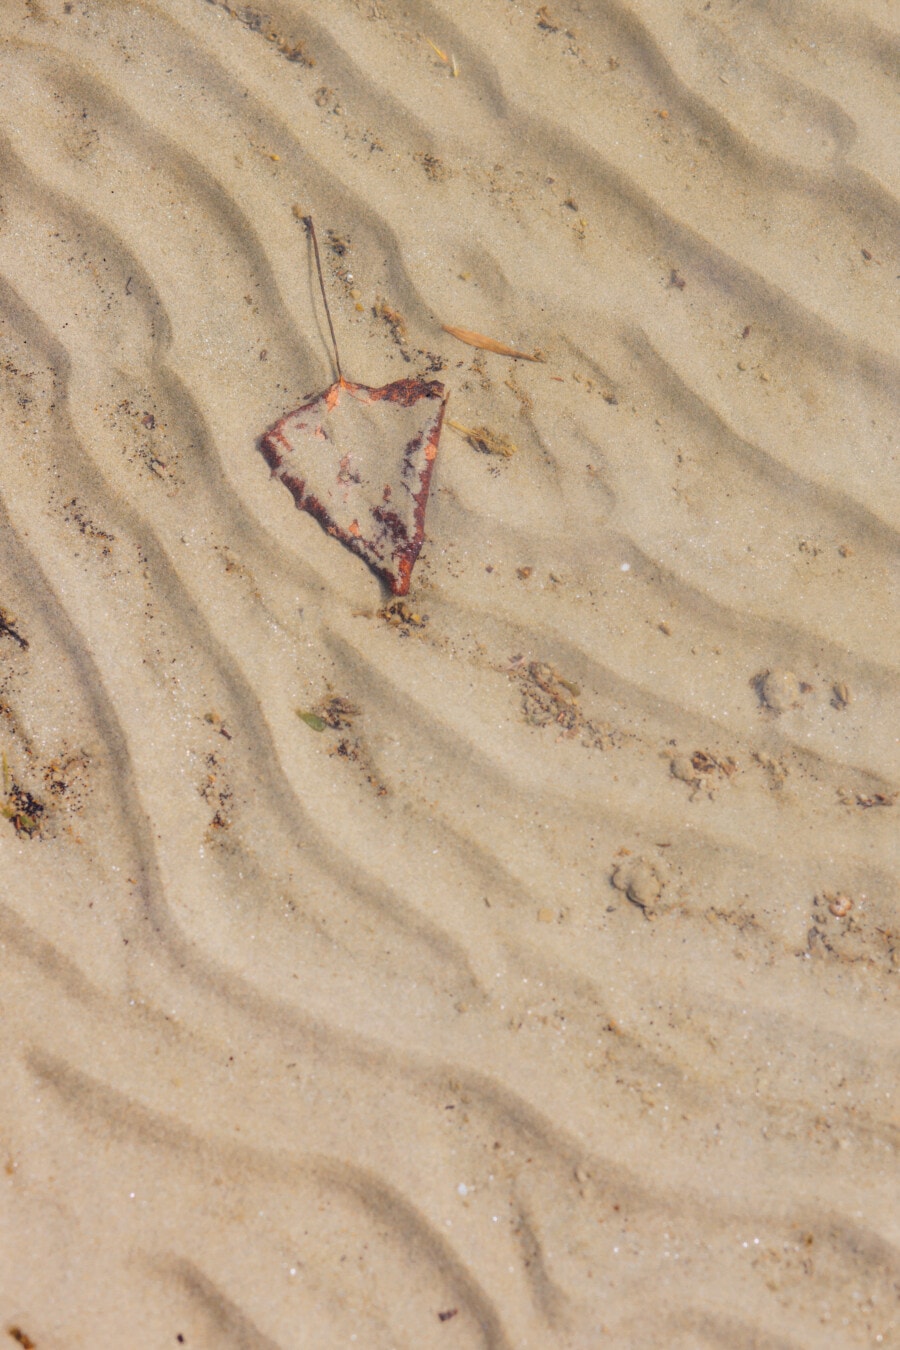 underwater, texture, sand, dirty, dry, leaf, soil, earth, nature, smooth